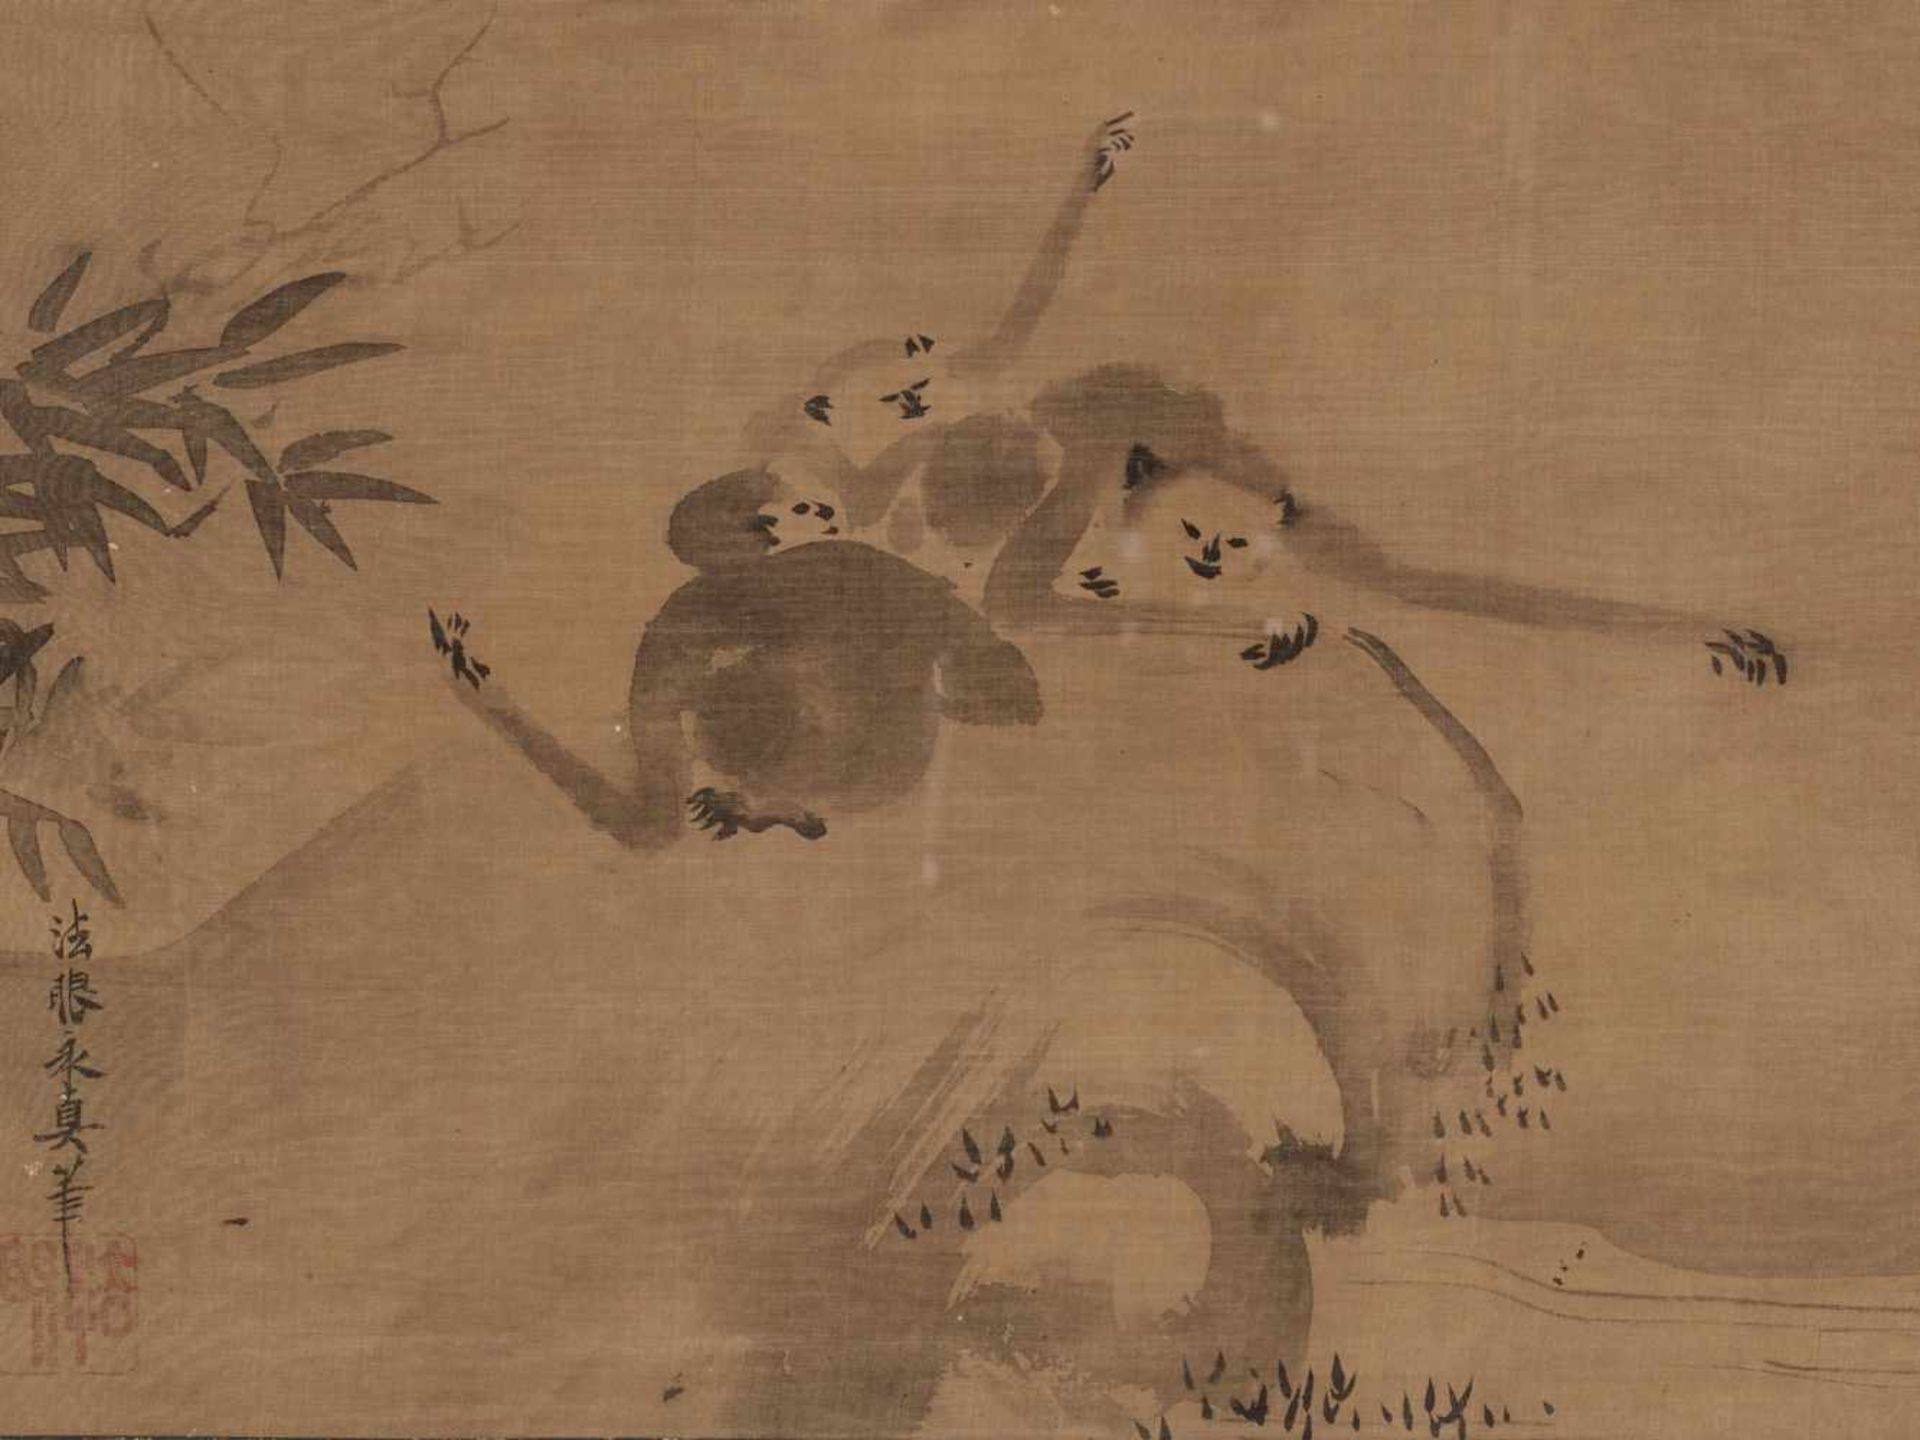 A SUMI-E DEPICTING GIBBONS BY KANO EISHIN YASUNOBU (1614-1685)Ink on paperJapan, 17th centuryThe - Image 5 of 10